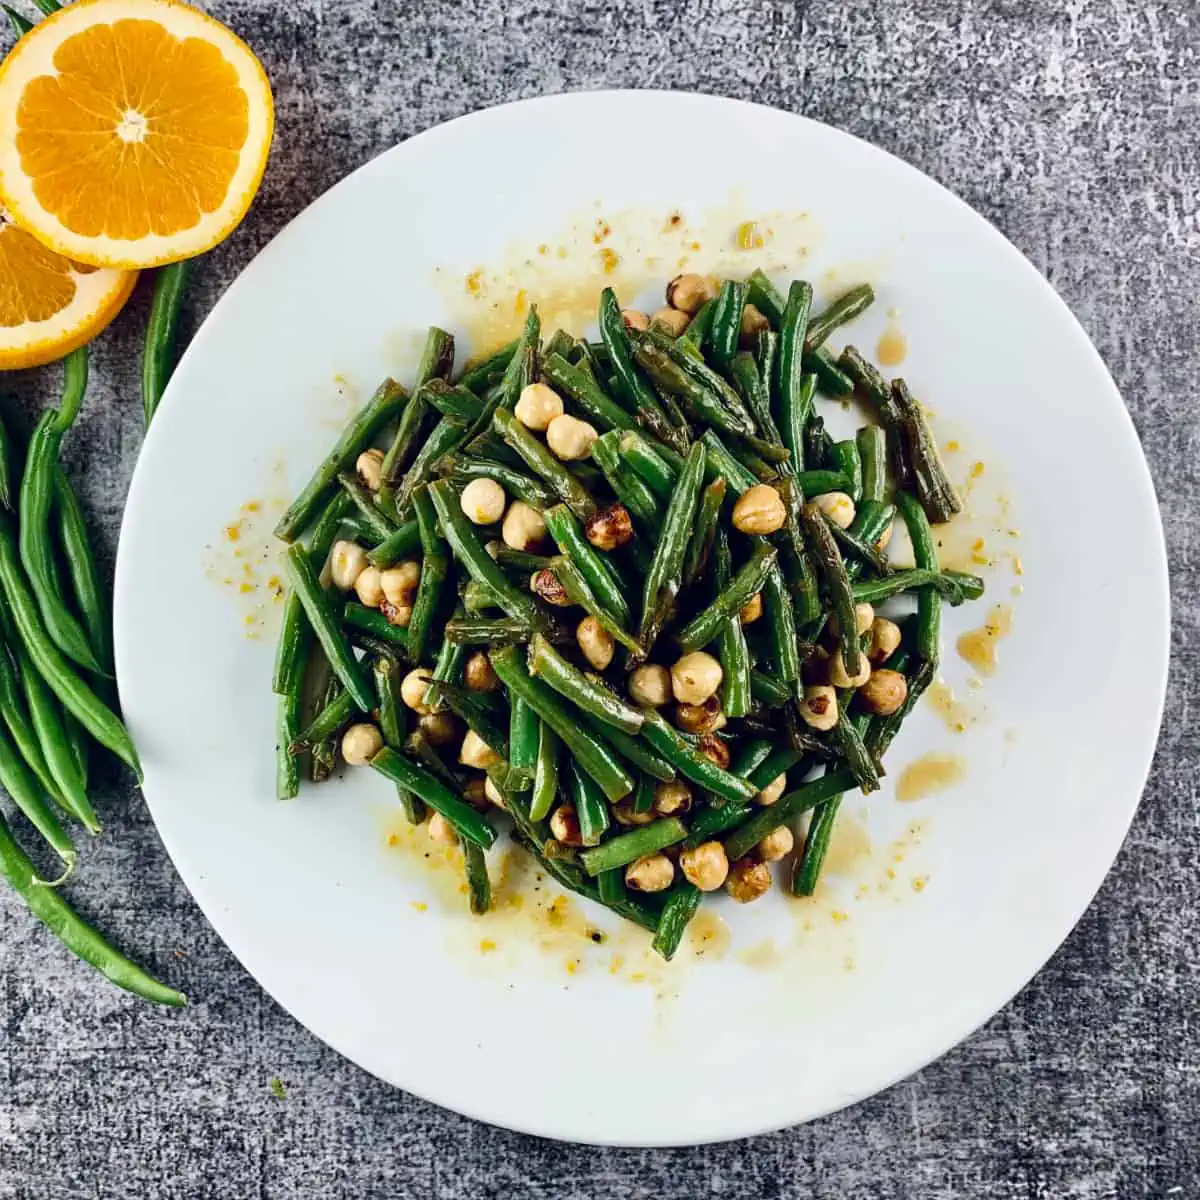 Green bean salad with orange and hazelnuts in a white platter with orange slices & beans on the side.